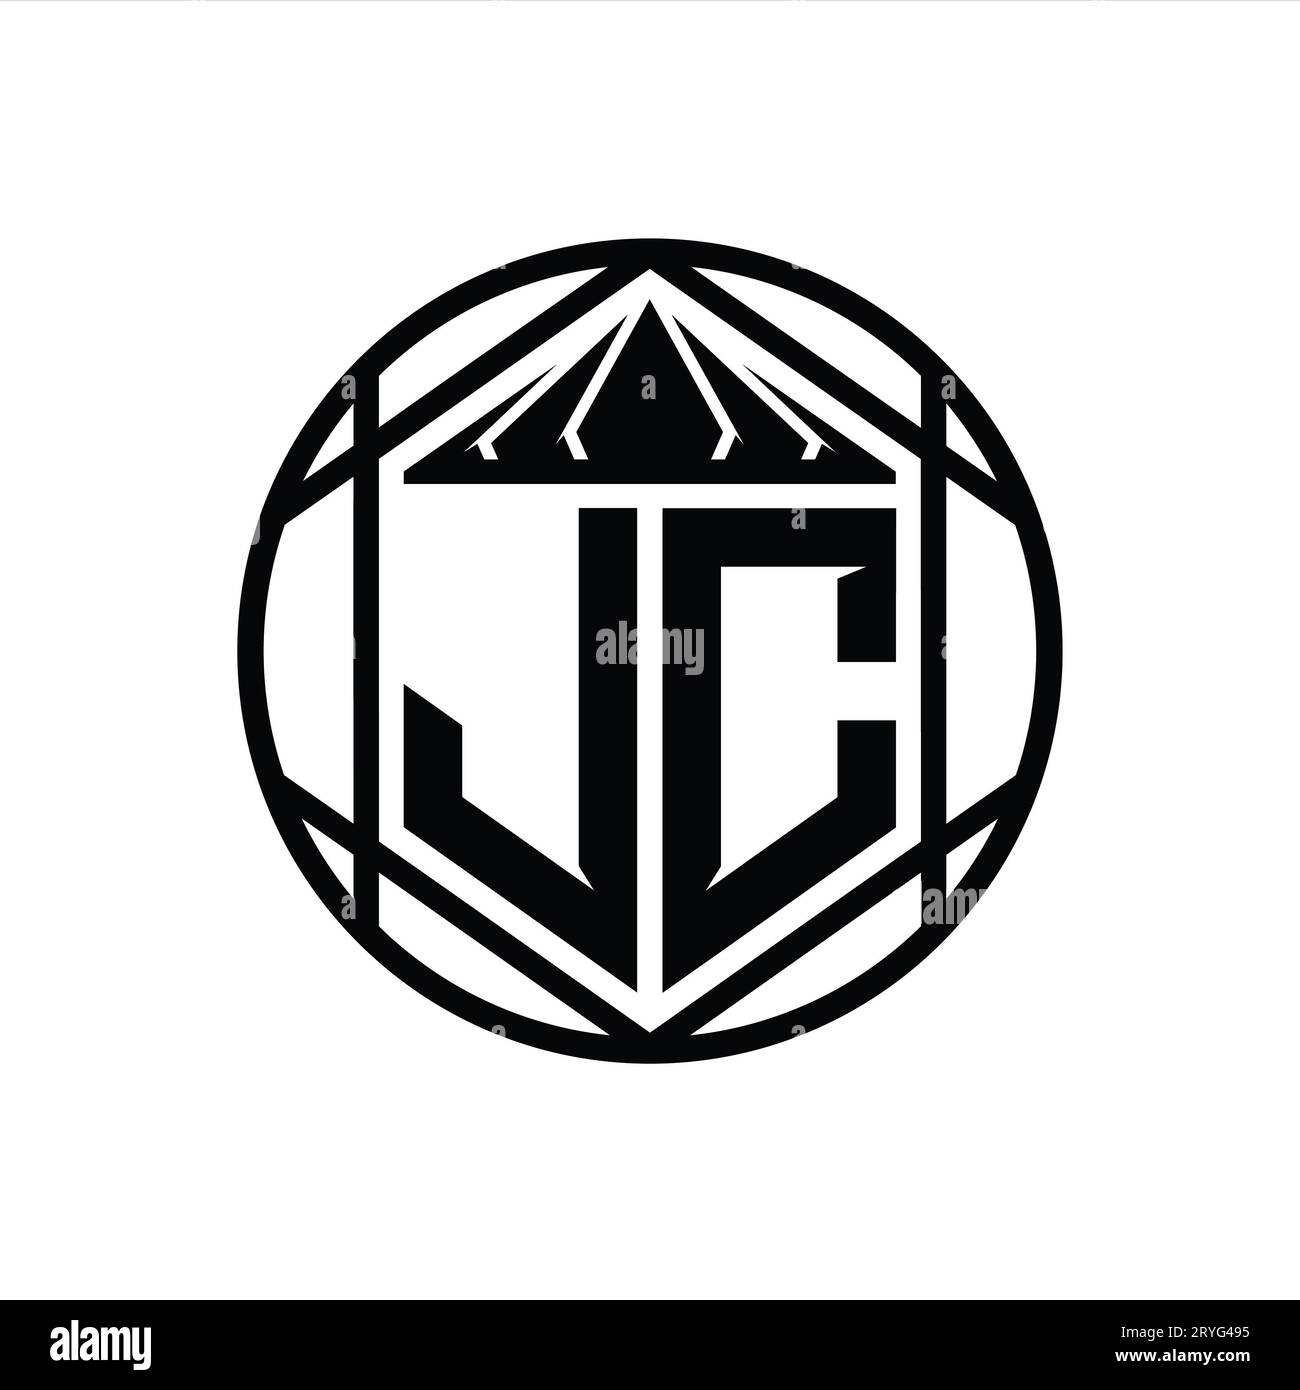 JC Letter Logo monogram hexagon slice crown sharp shield shape isolated circle abstract style design template Stock Photo